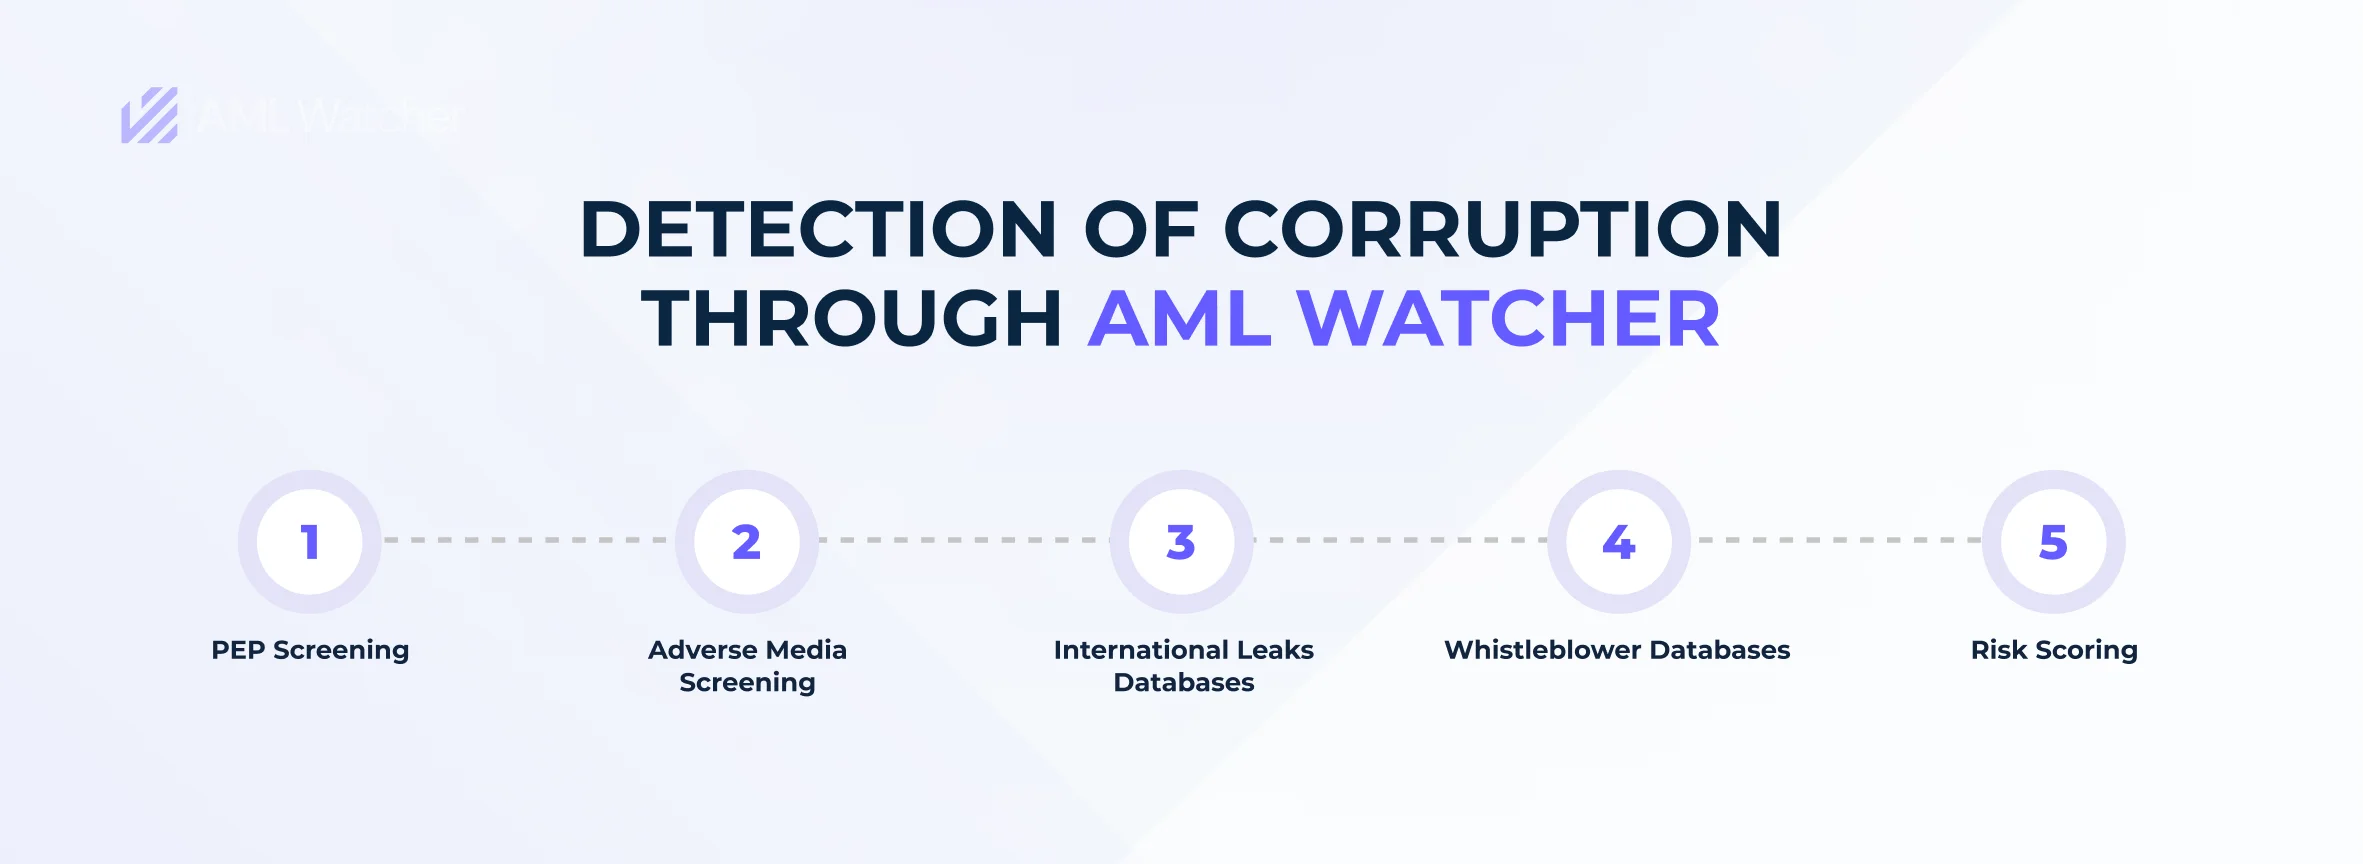 Infographic explains steps involved in the Detection of Corruption through AML Watcher